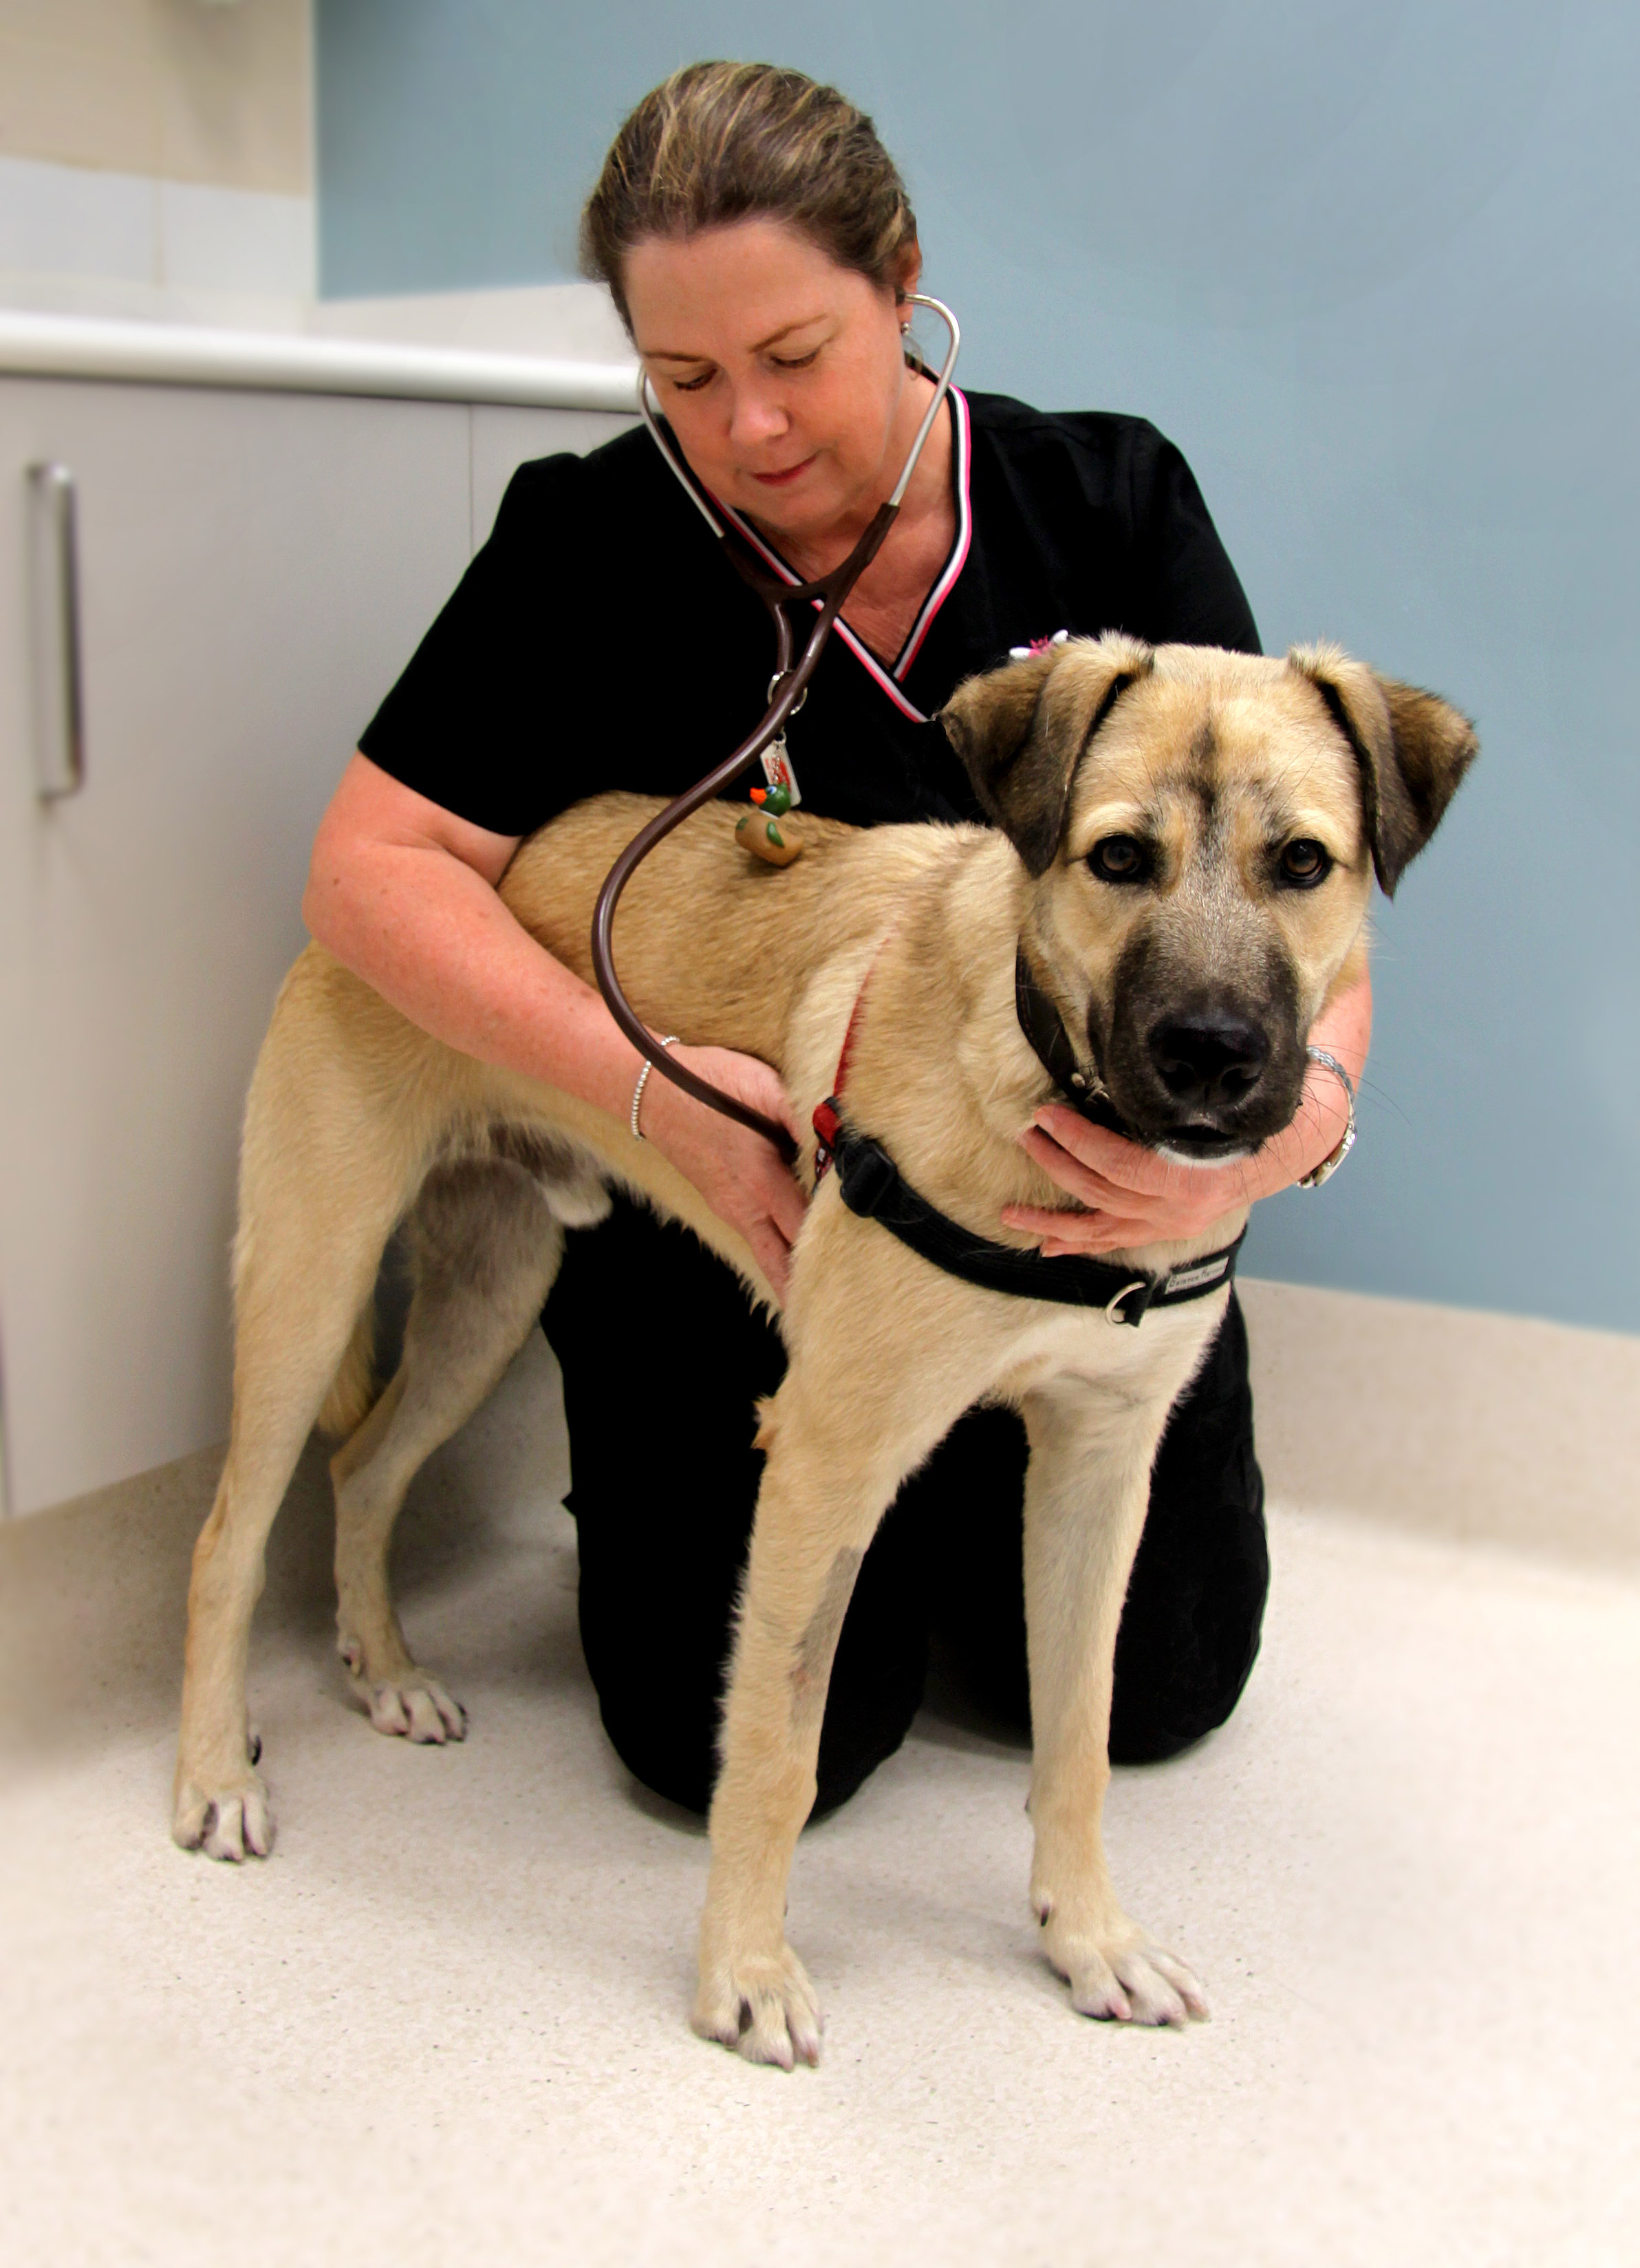 Trish Farry checking dog with stethoscope